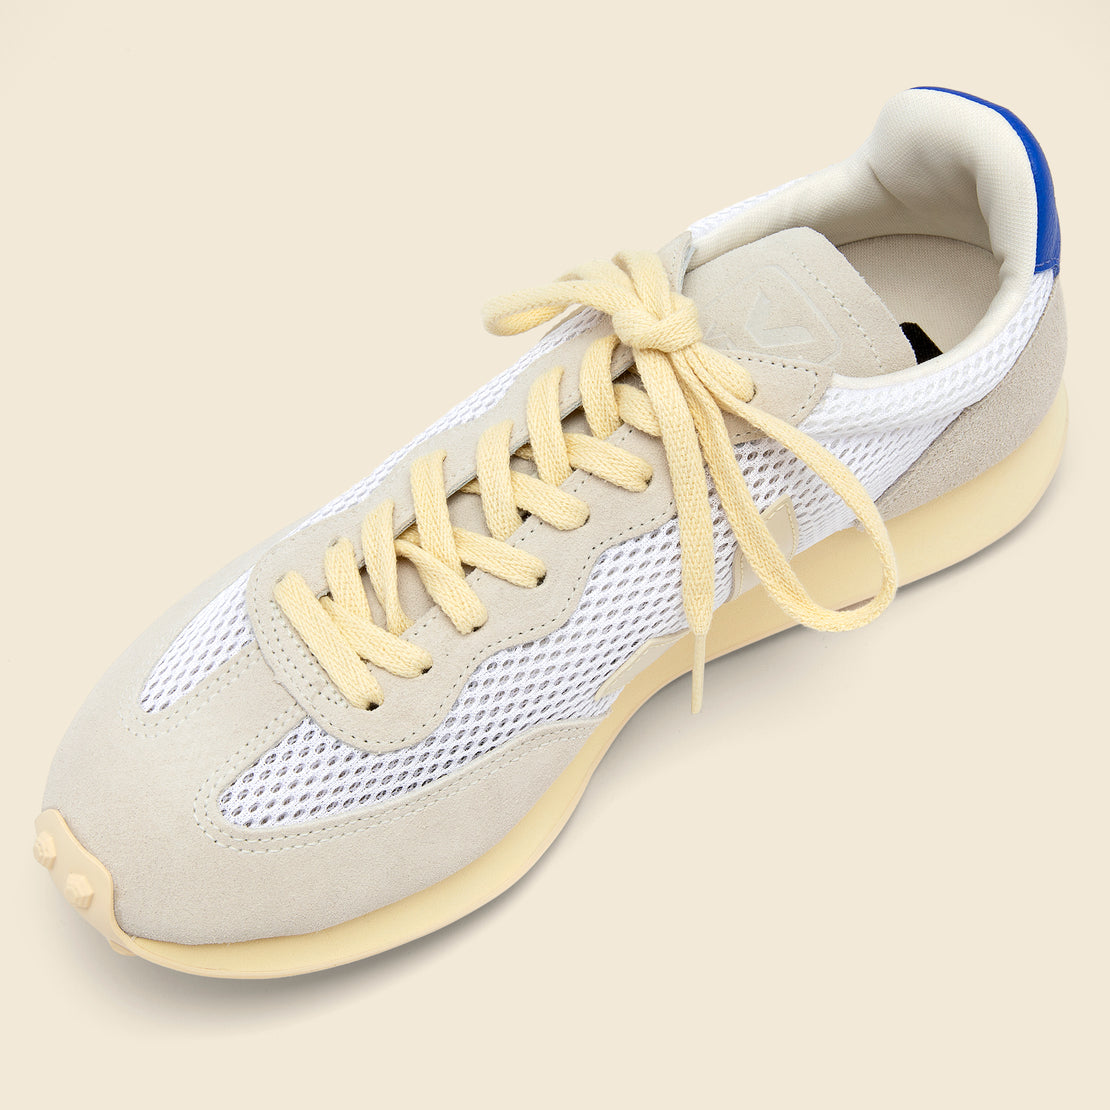 Rio Branco Aircell Sneaker - Lunar Pierre Paros - Veja - STAG Provisions - Shoes - Athletic